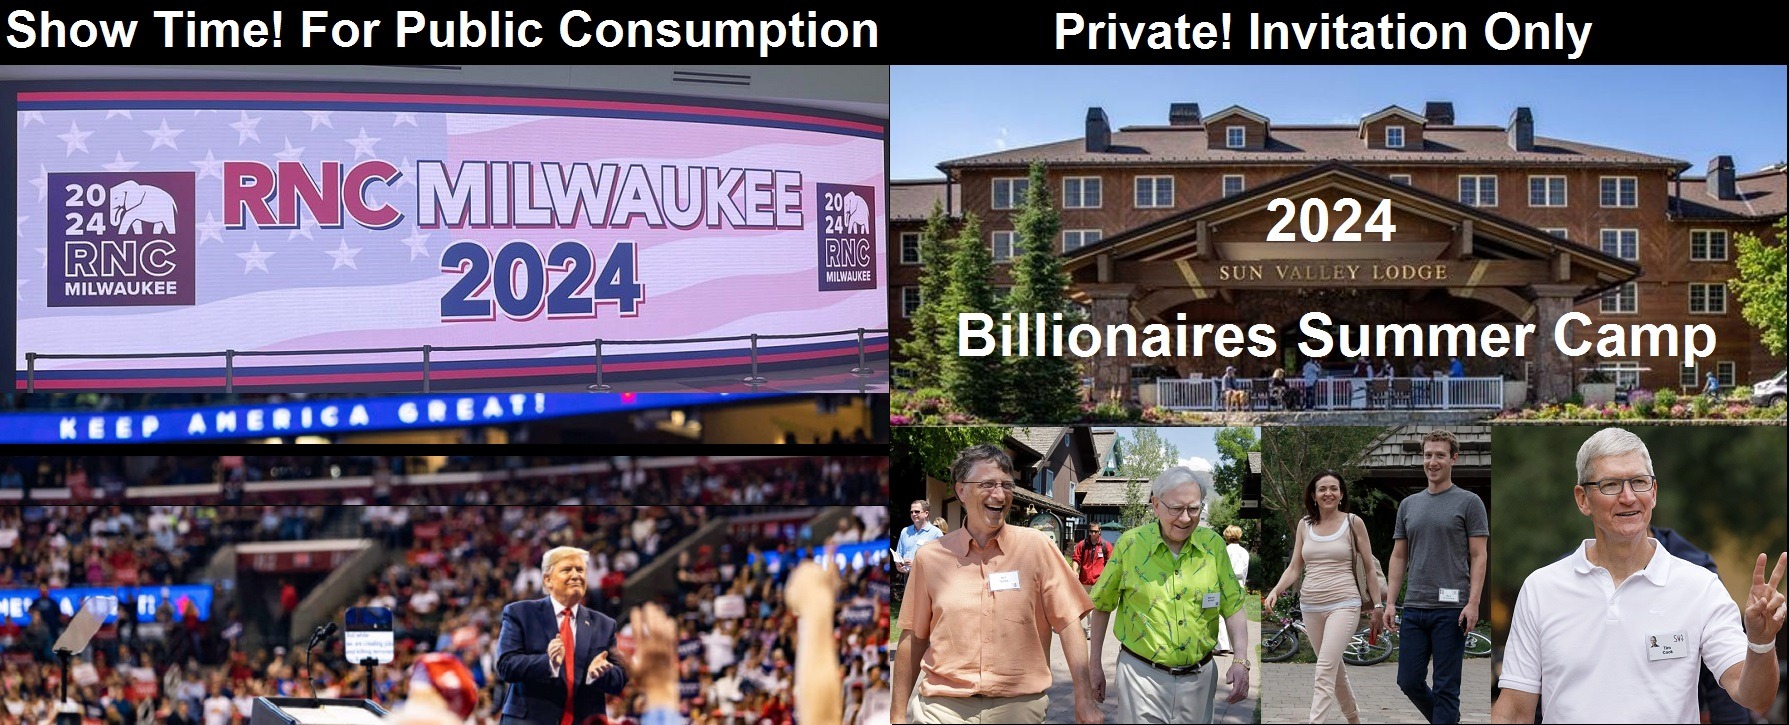 Sun Valley Conference 2024 Vs. Republican National Convention 2024